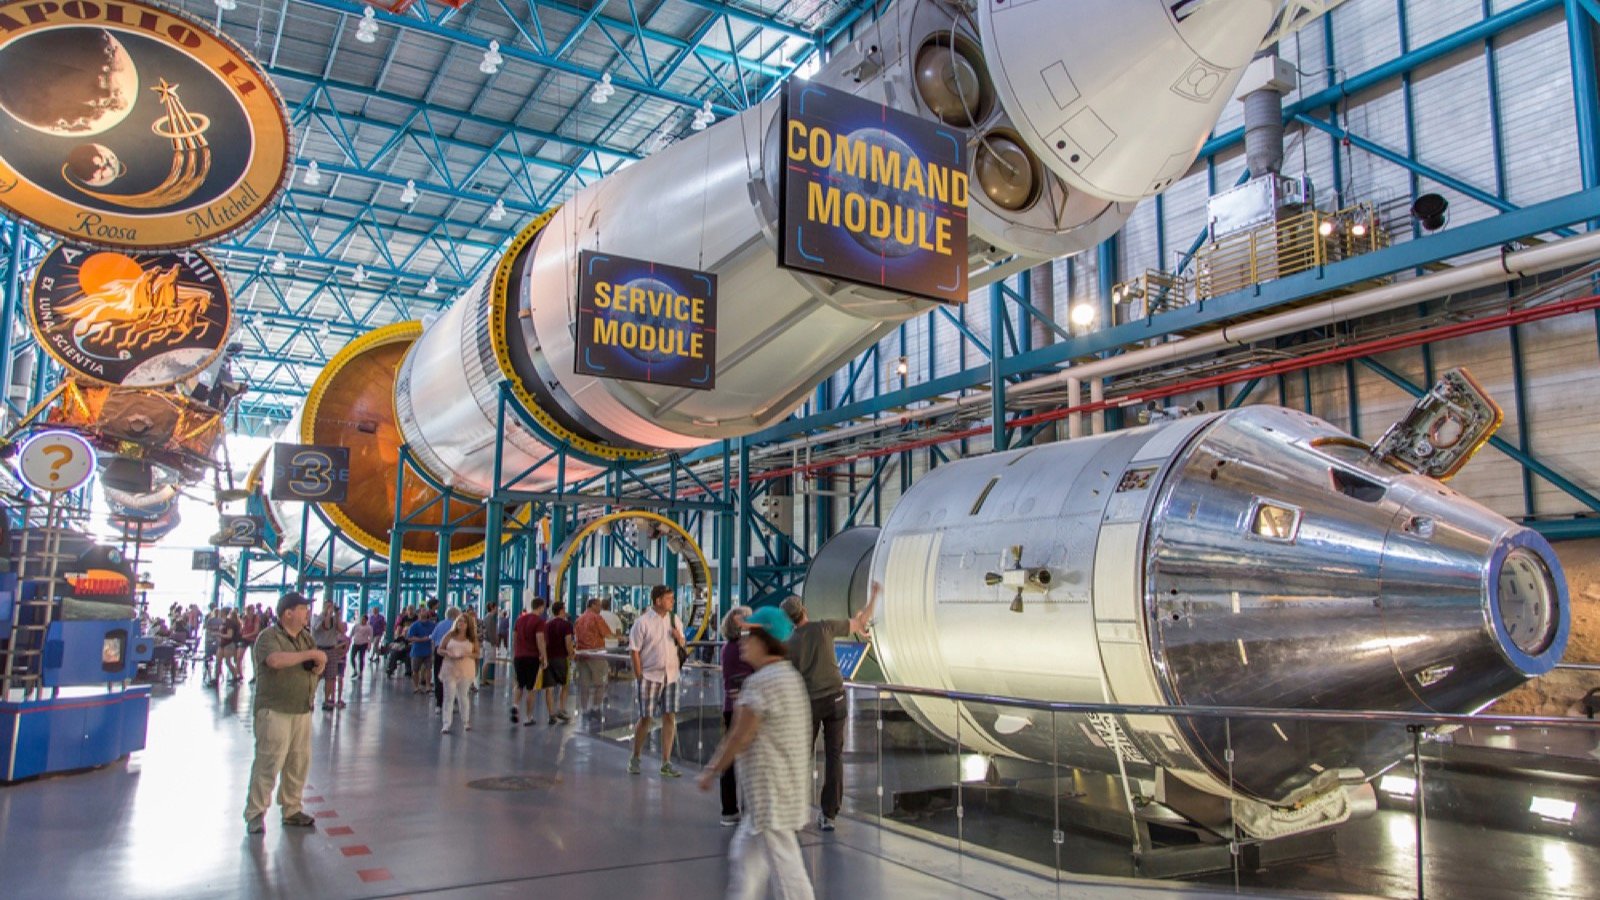 <p>The Kennedy Space Center at Cape Canaveral can be a little pricey. Still, it is a great experience for anyone interested in space exploration. An adult ticket costs $75, while a child’s ticket costs $65 for a one-day pass. However, those fees will let you tour launch sites, meet real-life astronauts, and simulate a real blast-off in the Shuttle Launch Experience. Avoid the fees by hanging out at Playalinda Beach, offering soft sand beaches and epic views of free rocket launches.</p>